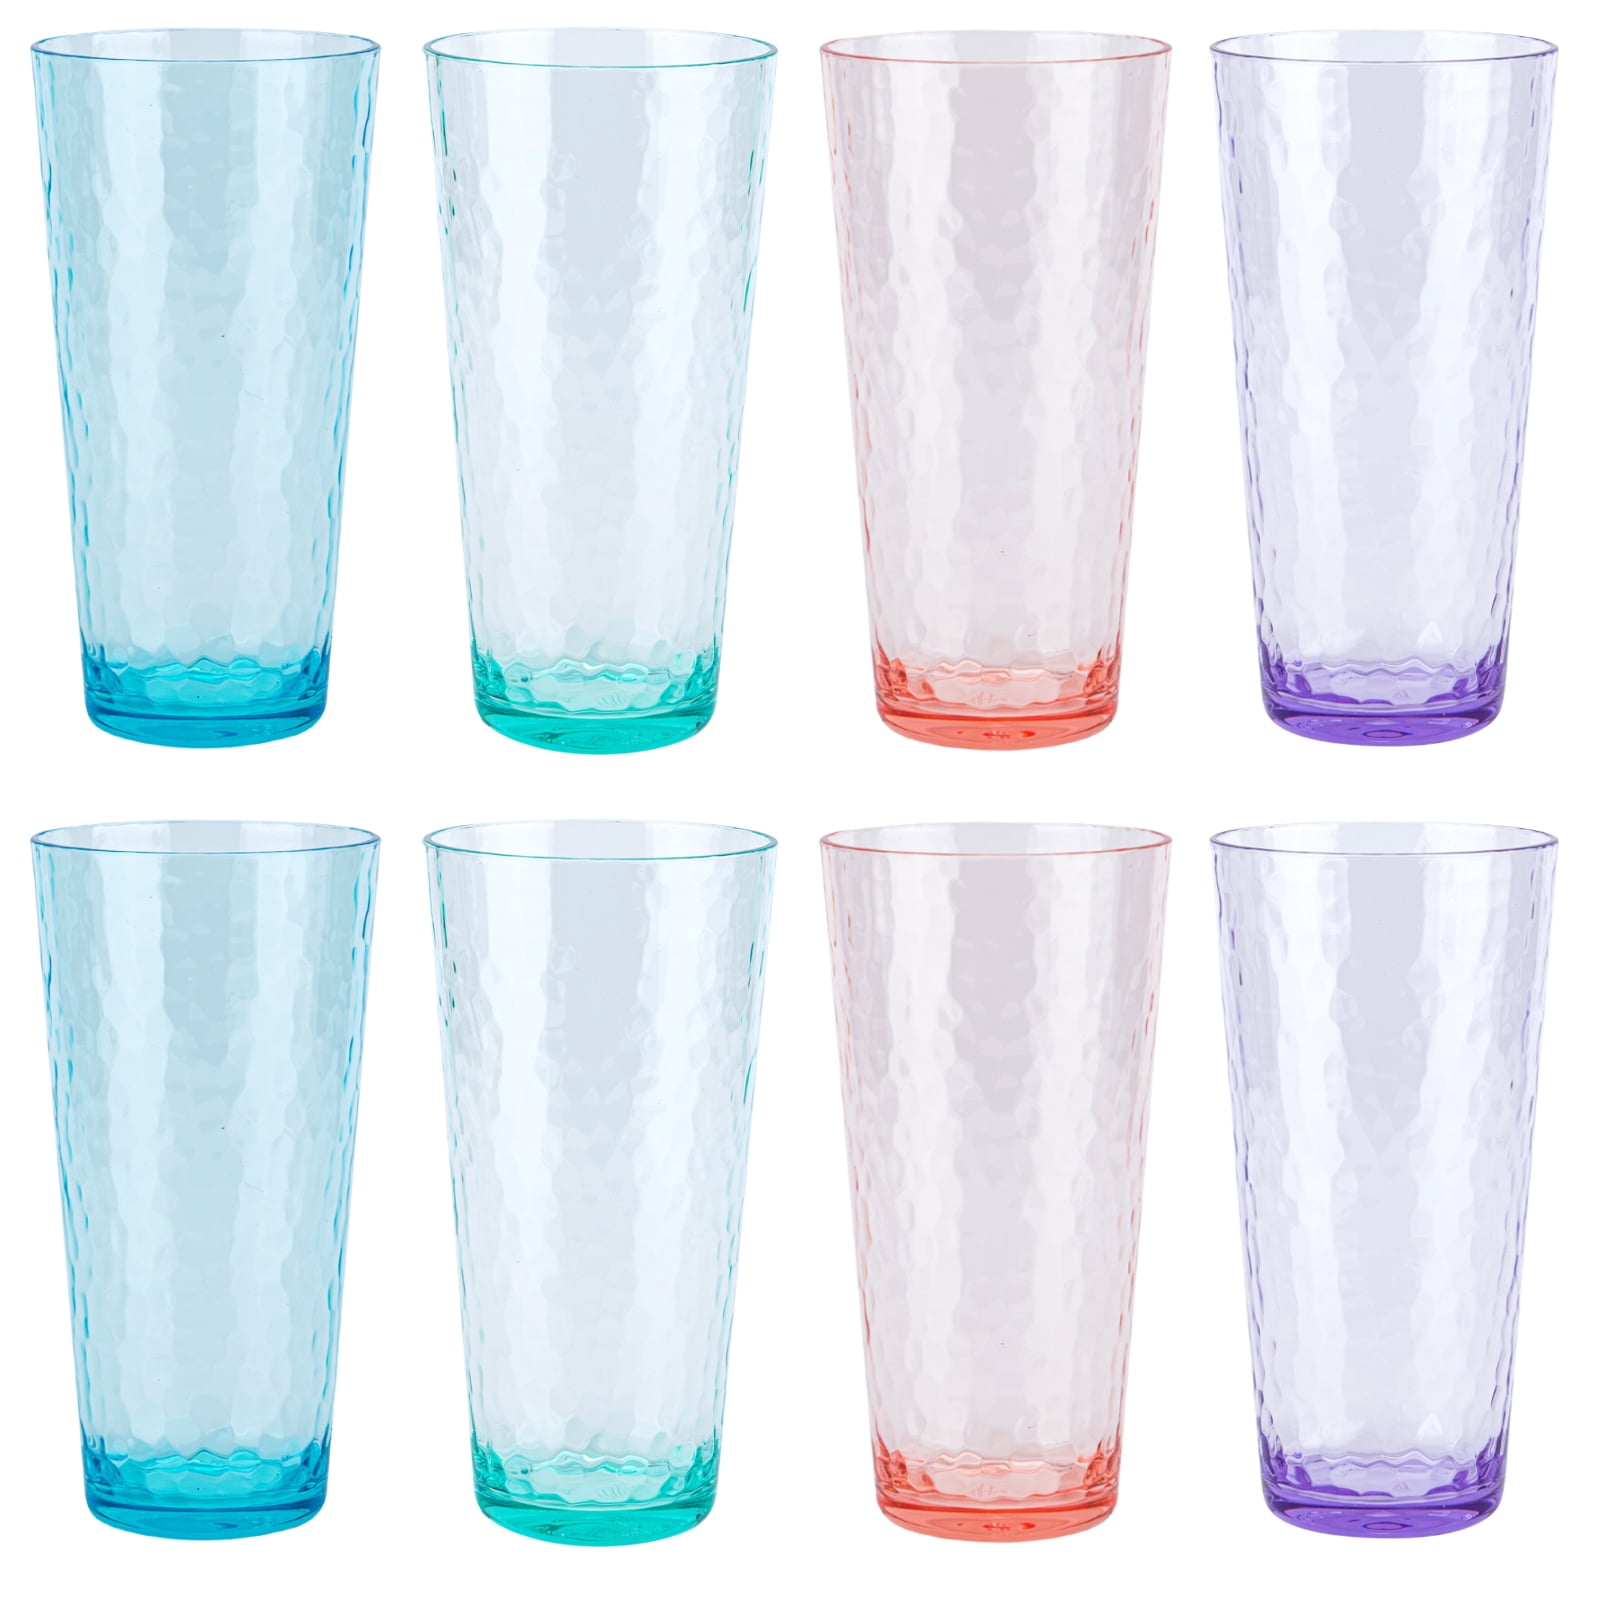 12 Oz Drinking Glasses Tritan Acrylic Cups Set By Decor Works - Glassware  Plastic Tumblers - Water G…See more 12 Oz Drinking Glasses Tritan Acrylic